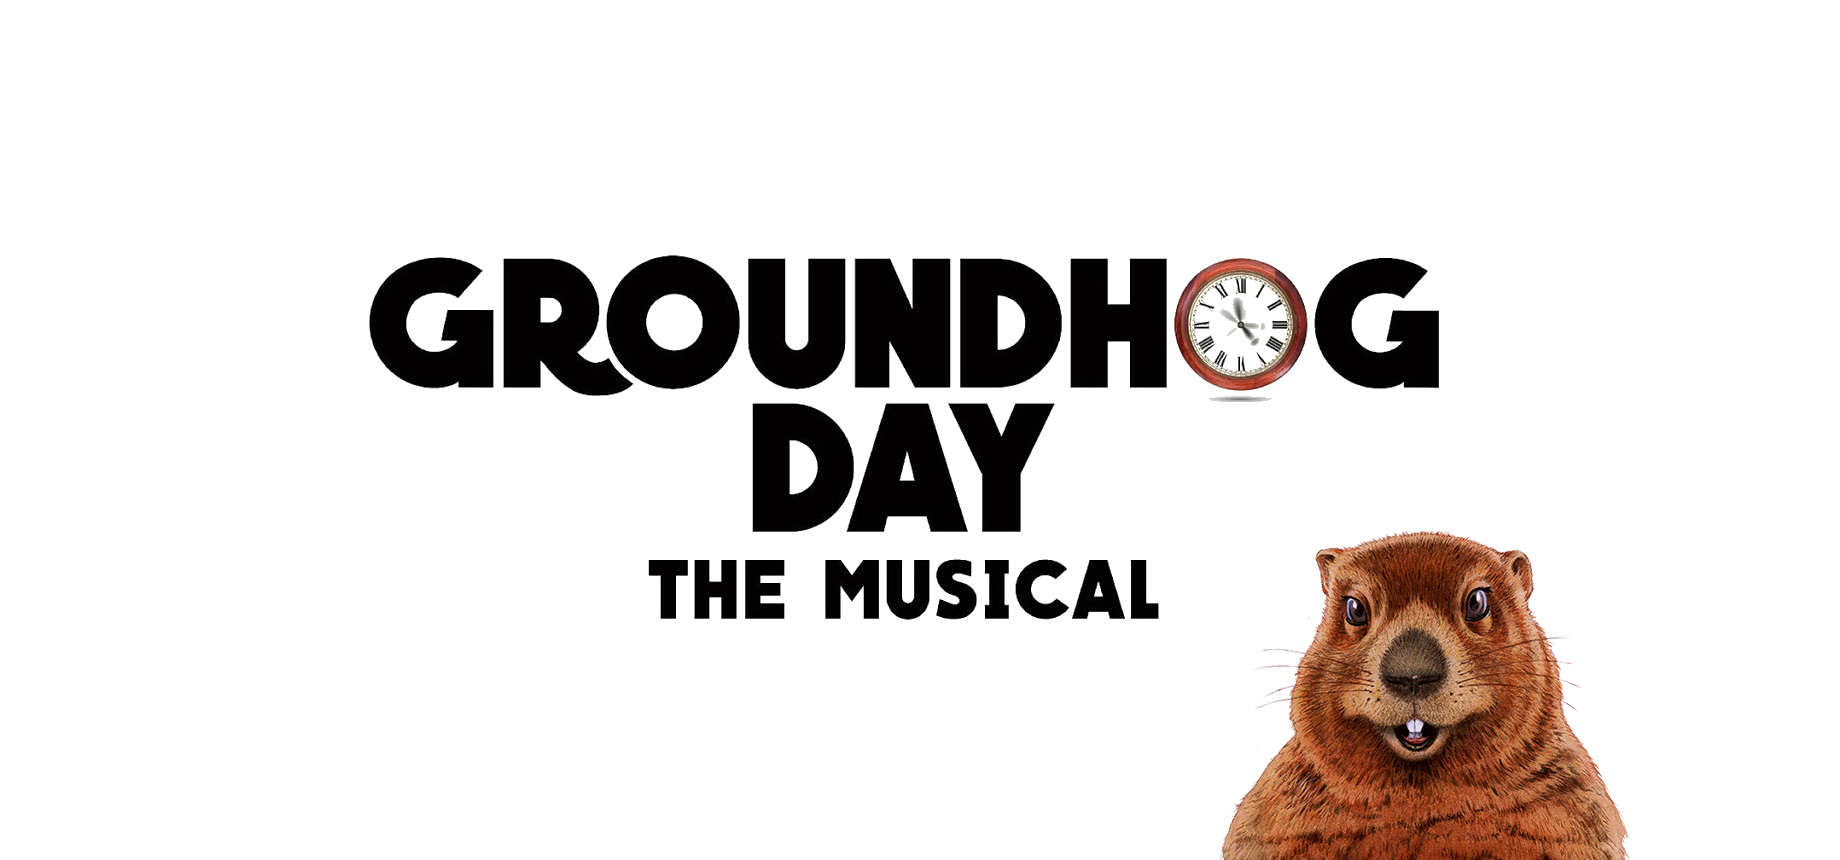 Groundhog Day' Is Now A Musical, And Here Are The Songs : NPR